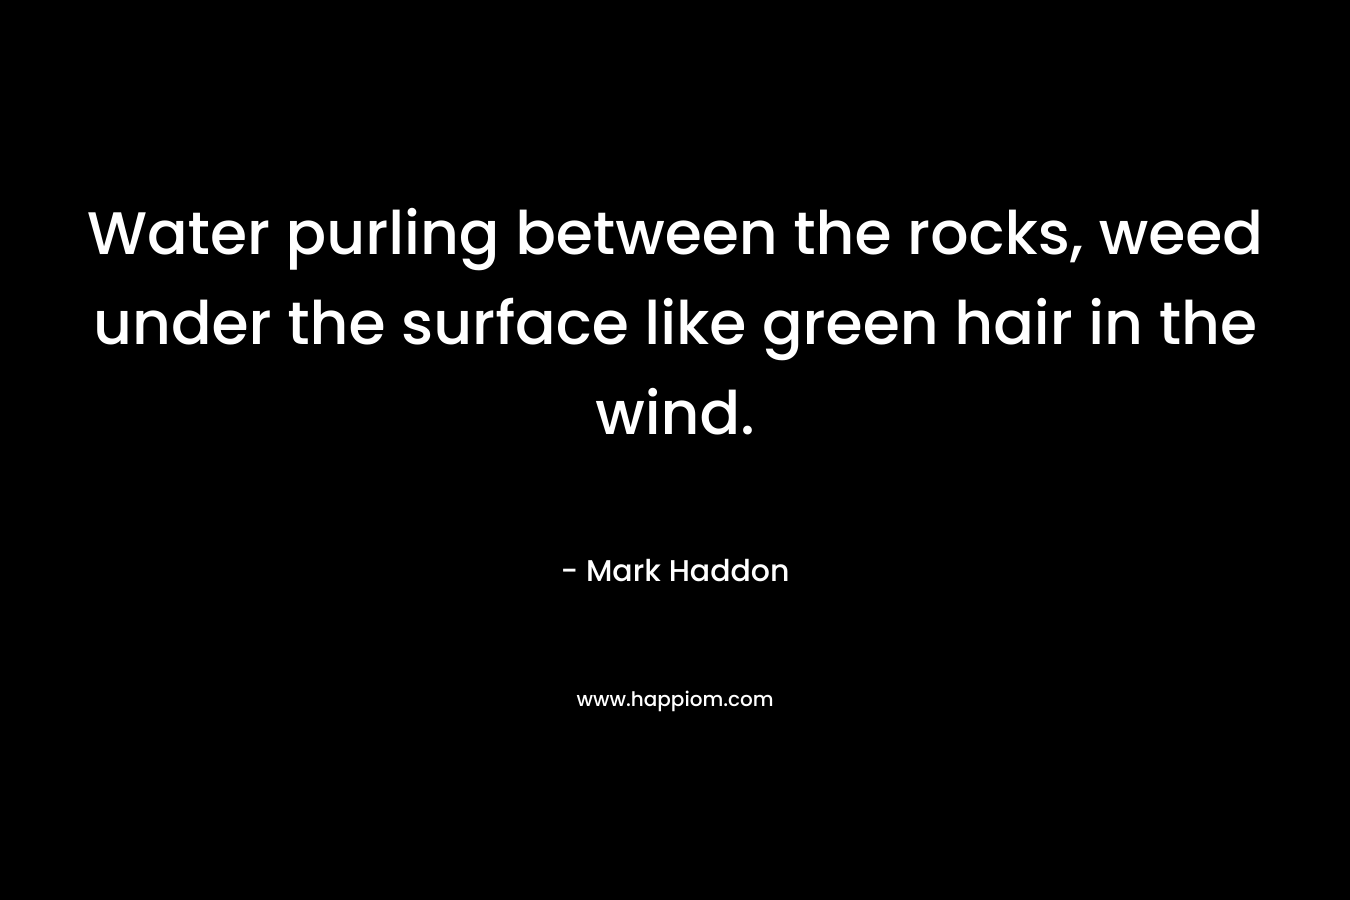 Water purling between the rocks, weed under the surface like green hair in the wind.